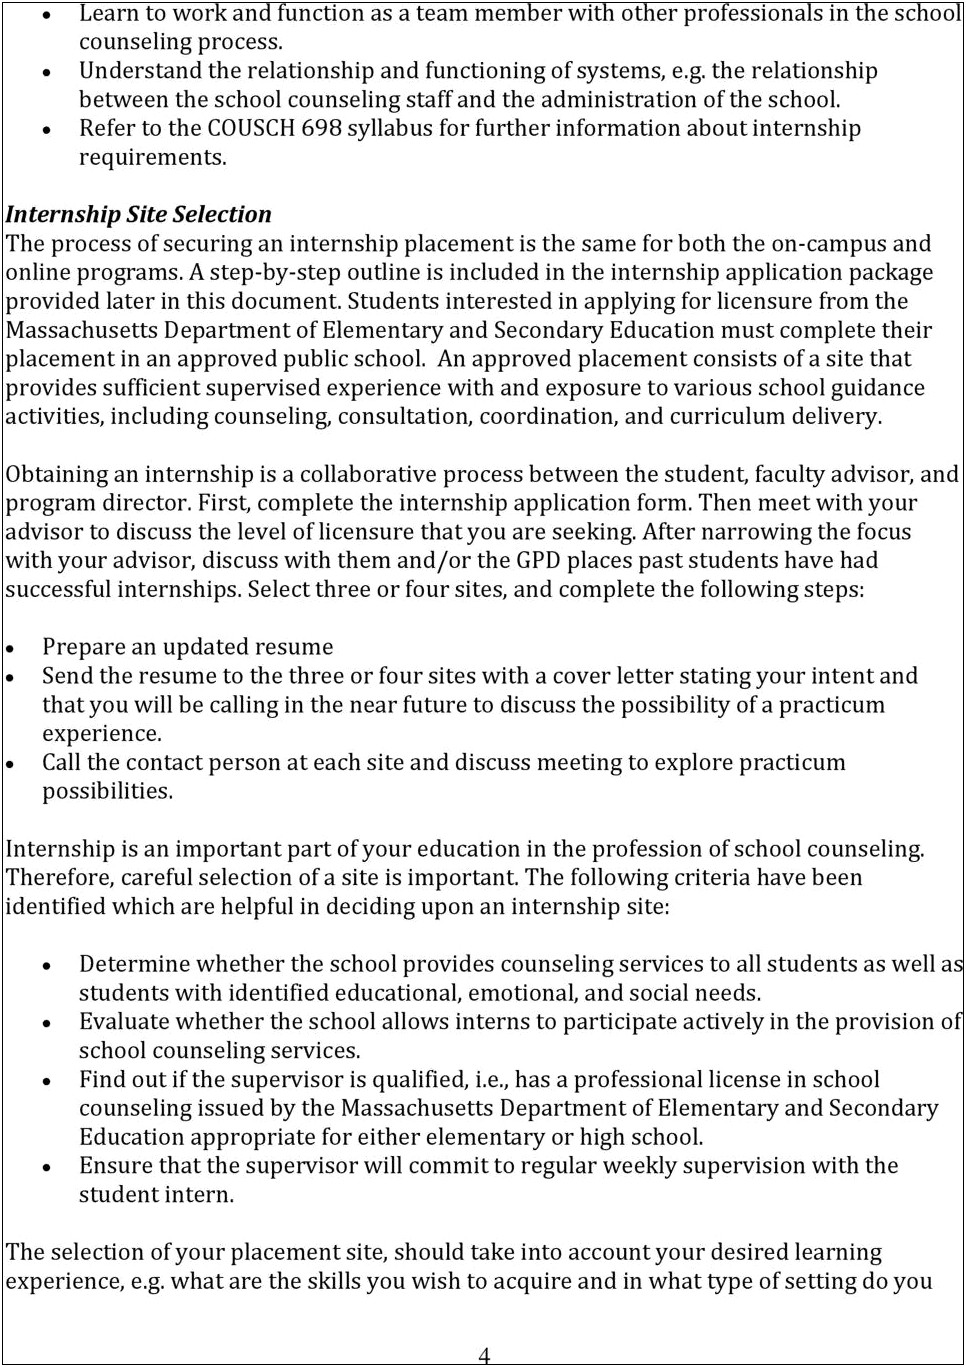 After School Counselor Intern On Resume